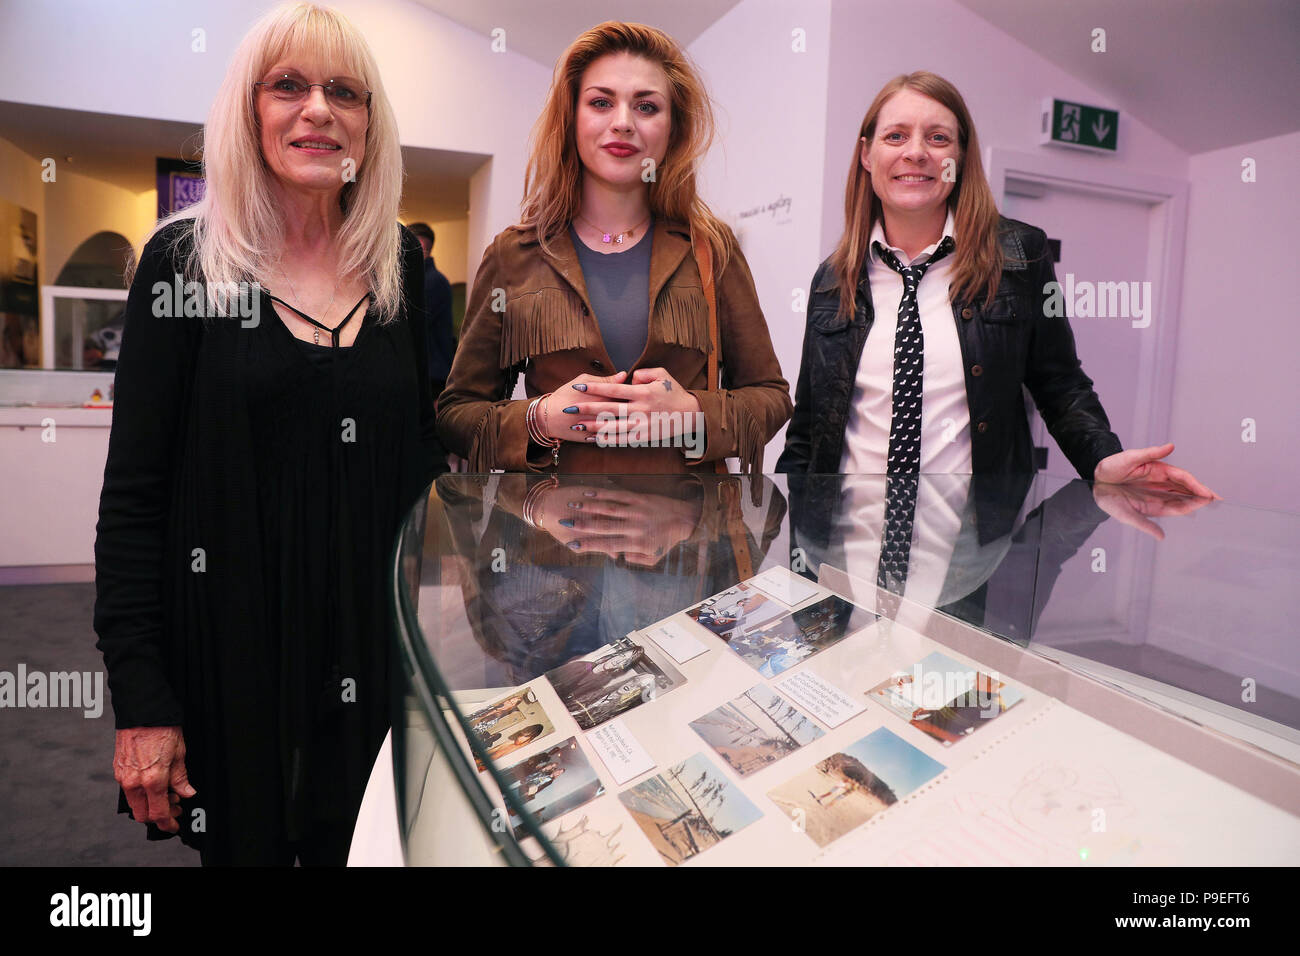 Kurt Cobain's mother Wendy O'Connor (left) daughter Frances Bean Cobain (centre) and sister Kim Cobain stand alongside some of the photographs on display, during the opening of the 'Growing Up Kurt' exhibition on the life of the Nirvana frontman, at the museum of Style Icons in Newbridge, Ireland. Stock Photo